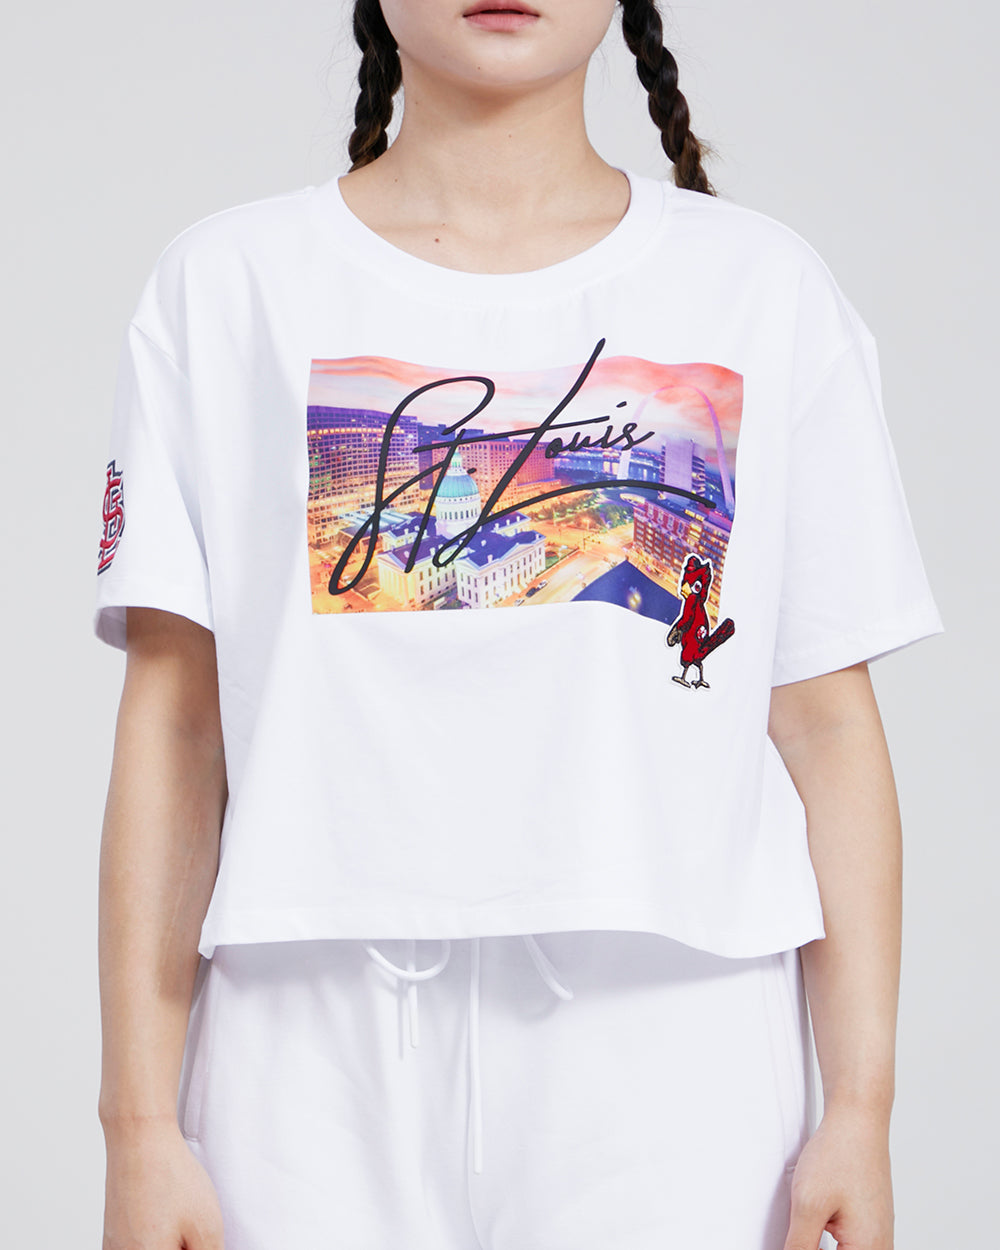 MLB ST. LOUIS CARDINALS CITY SCAPE WOMEN´S BOXY TEE (WHITE)